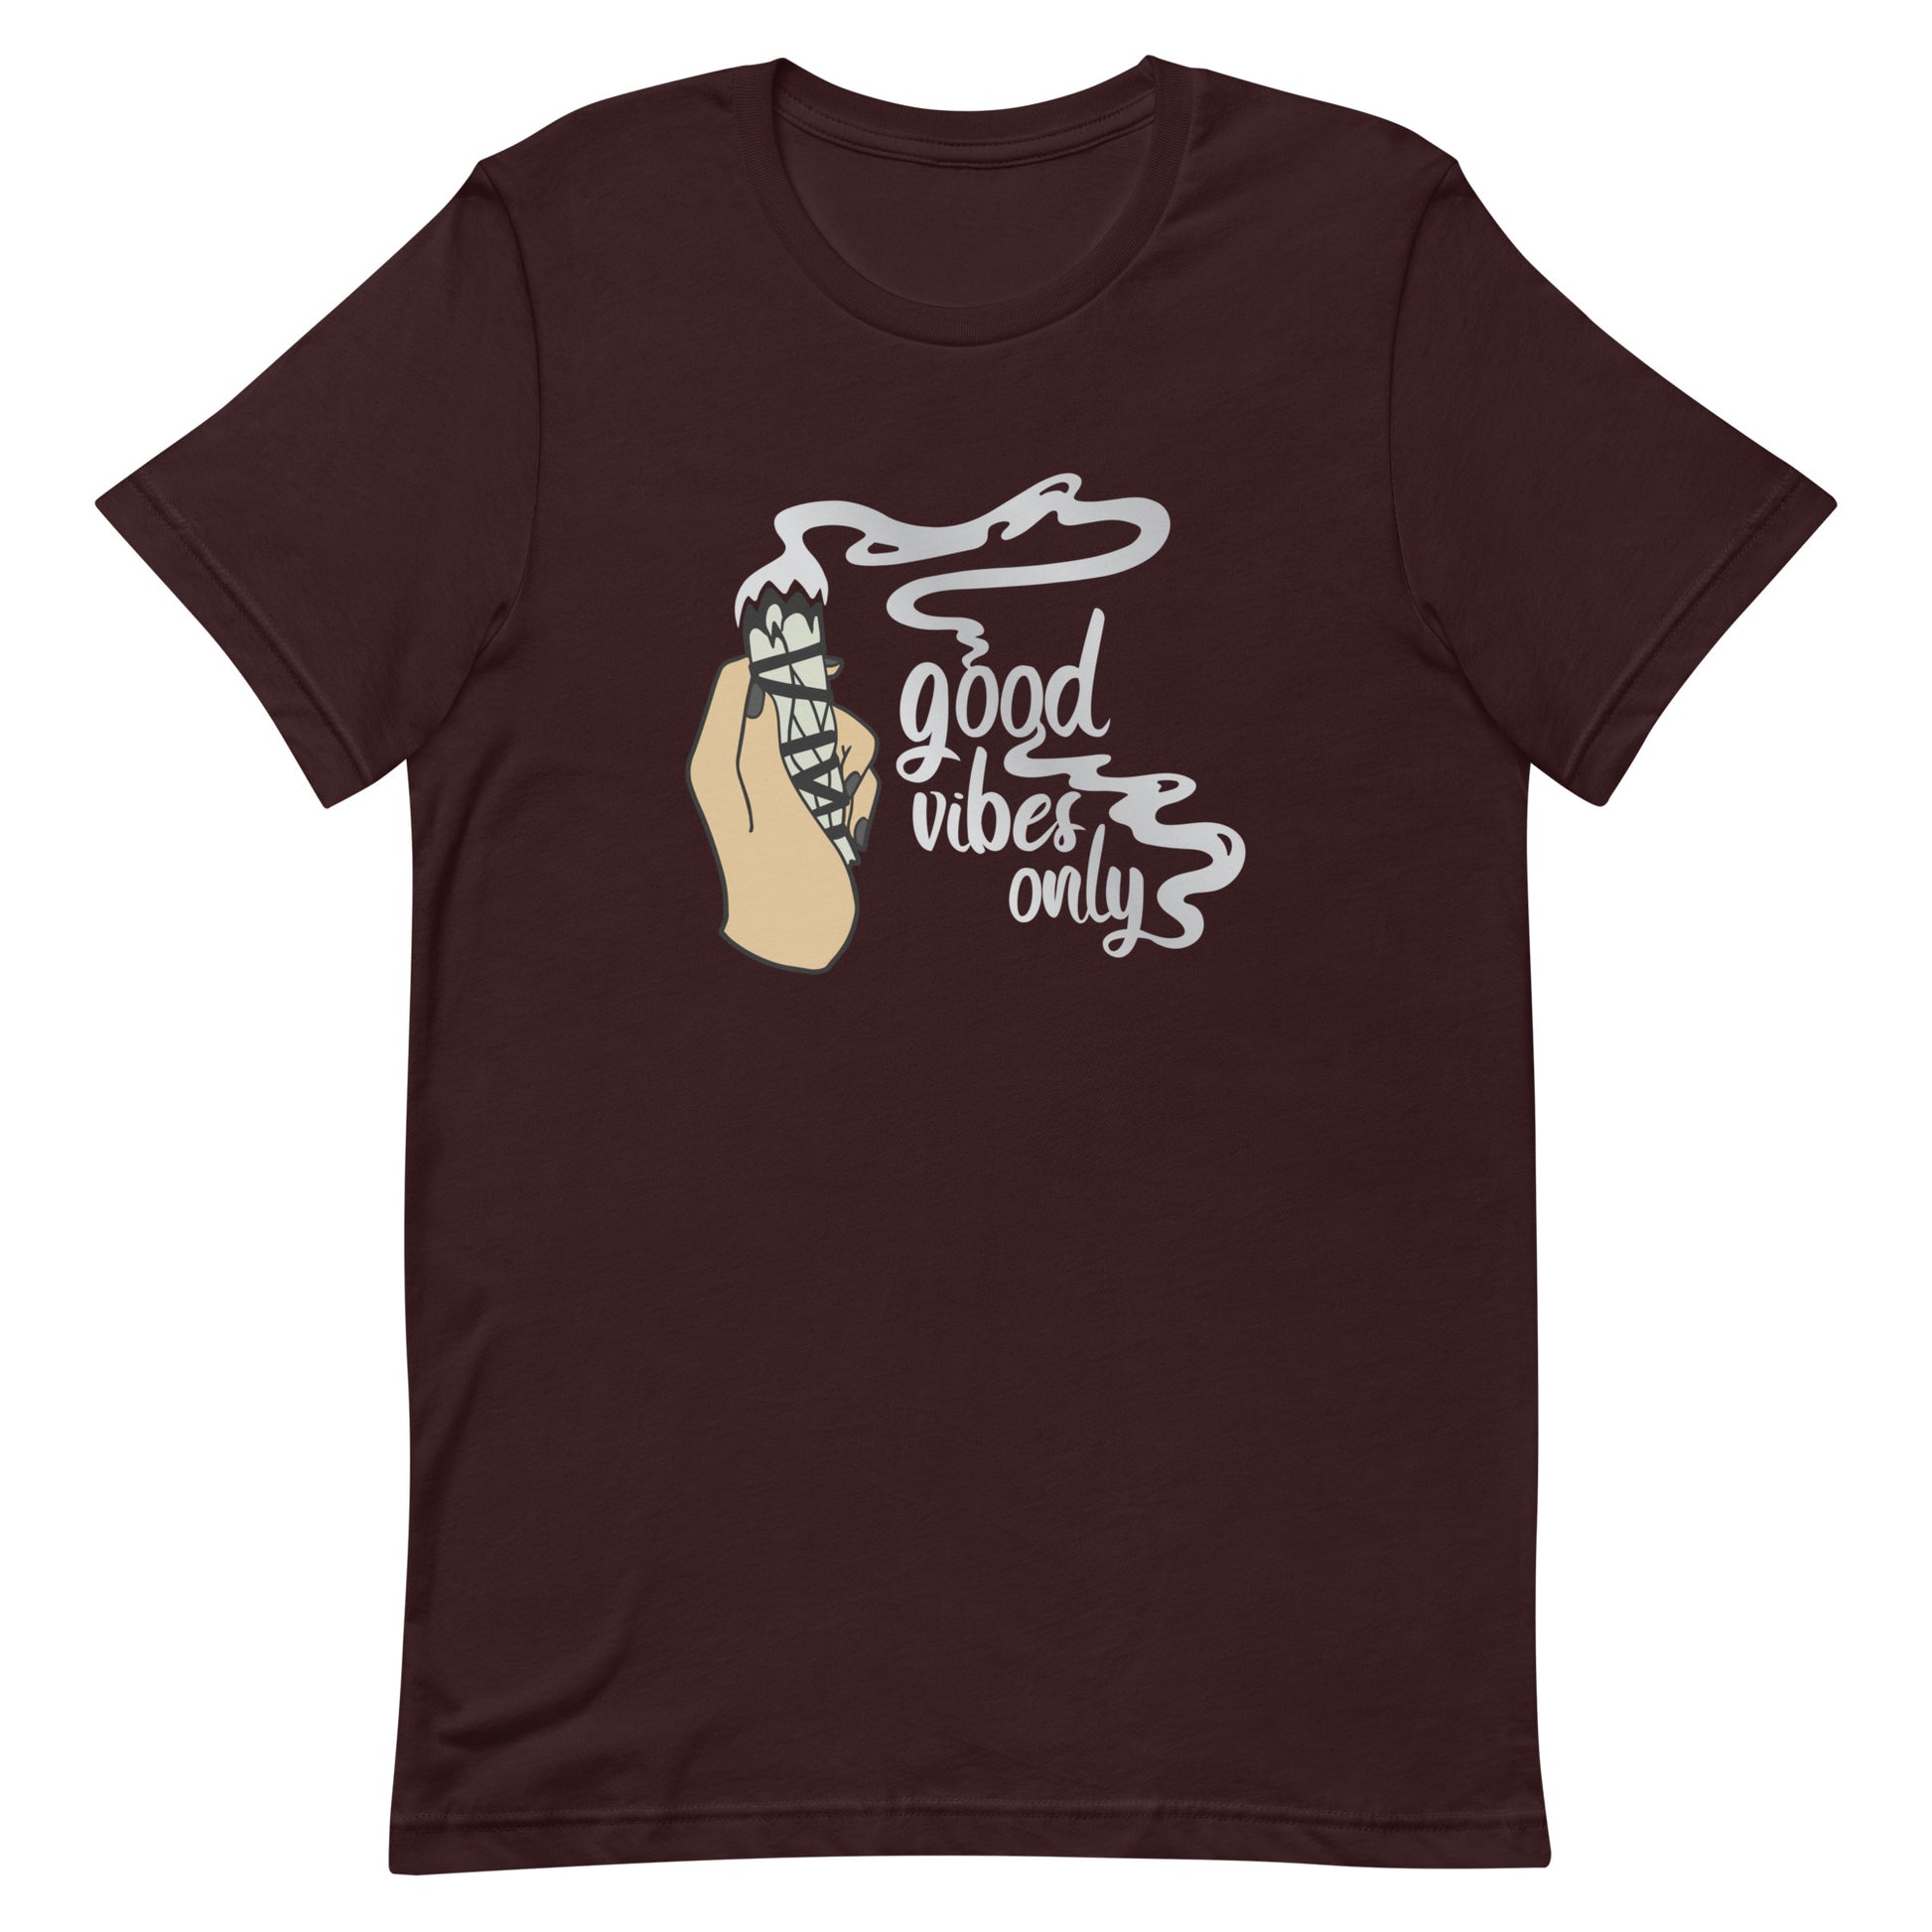 A maroon crewneck t-shirt featuring an illustration of a hand holding a sage smudge stick. Smoke is flowing from the tip of the sage and forms text reading "good vibes only"